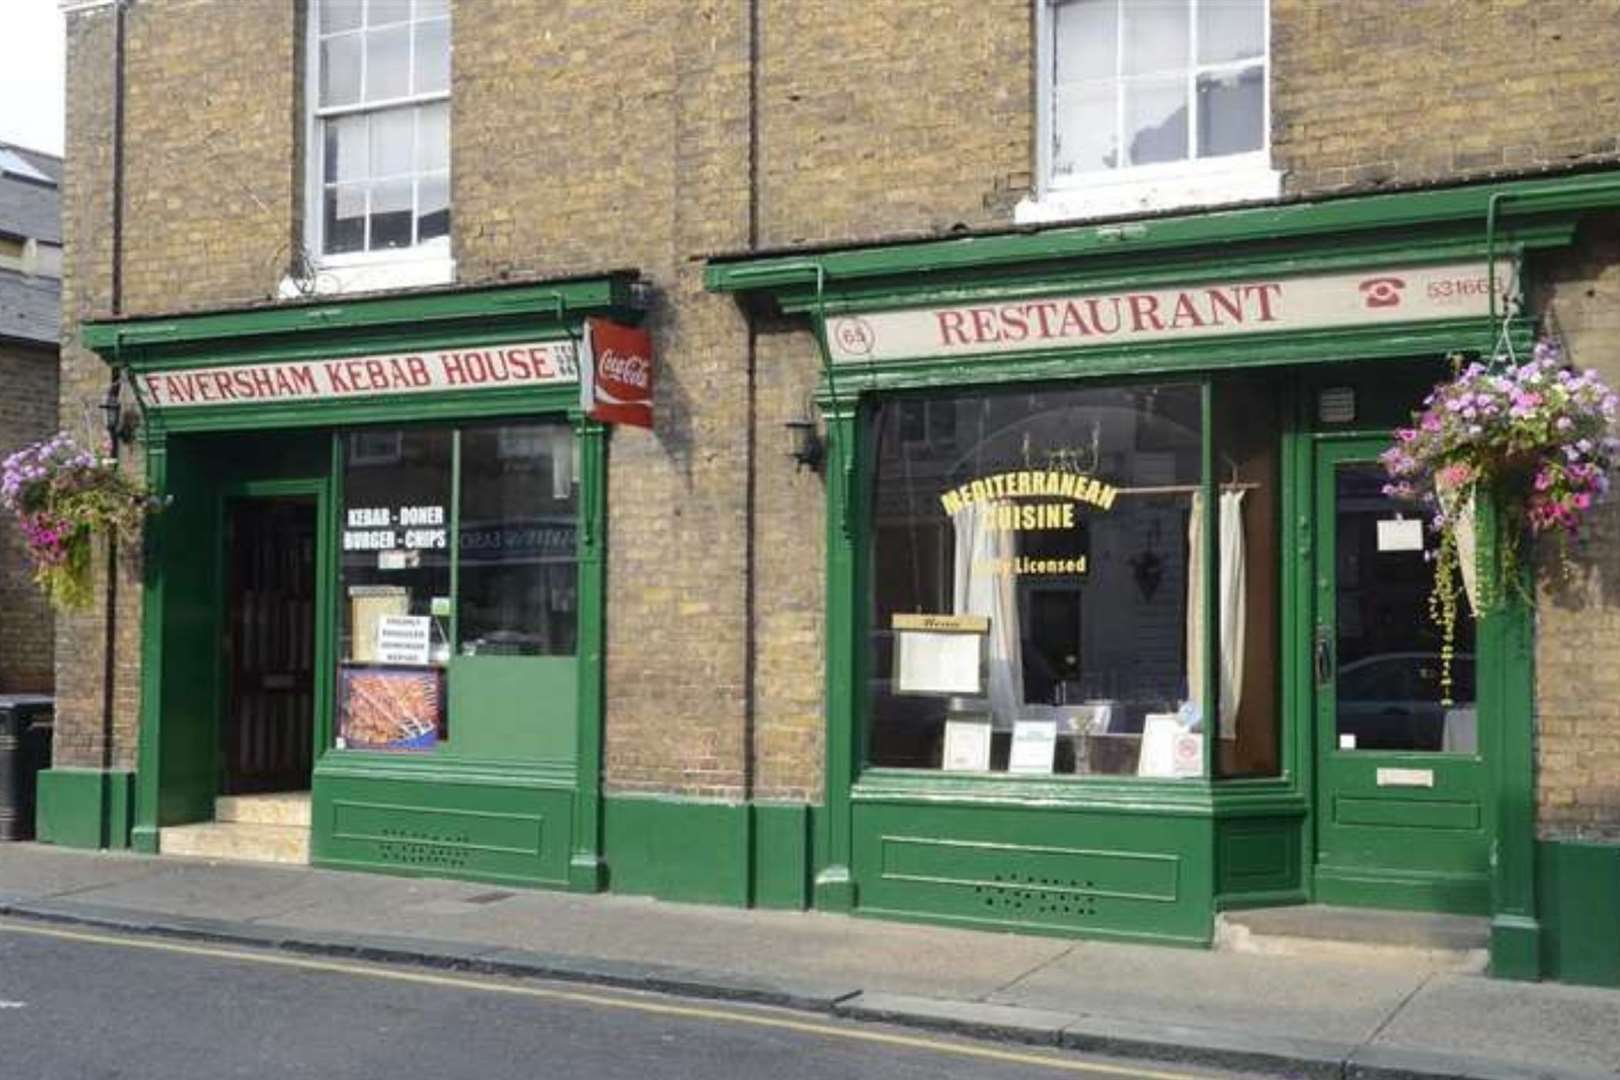 Faversham Kebab House and the adjoining Mediterranean restaurant - but the kebabs are takeaway only